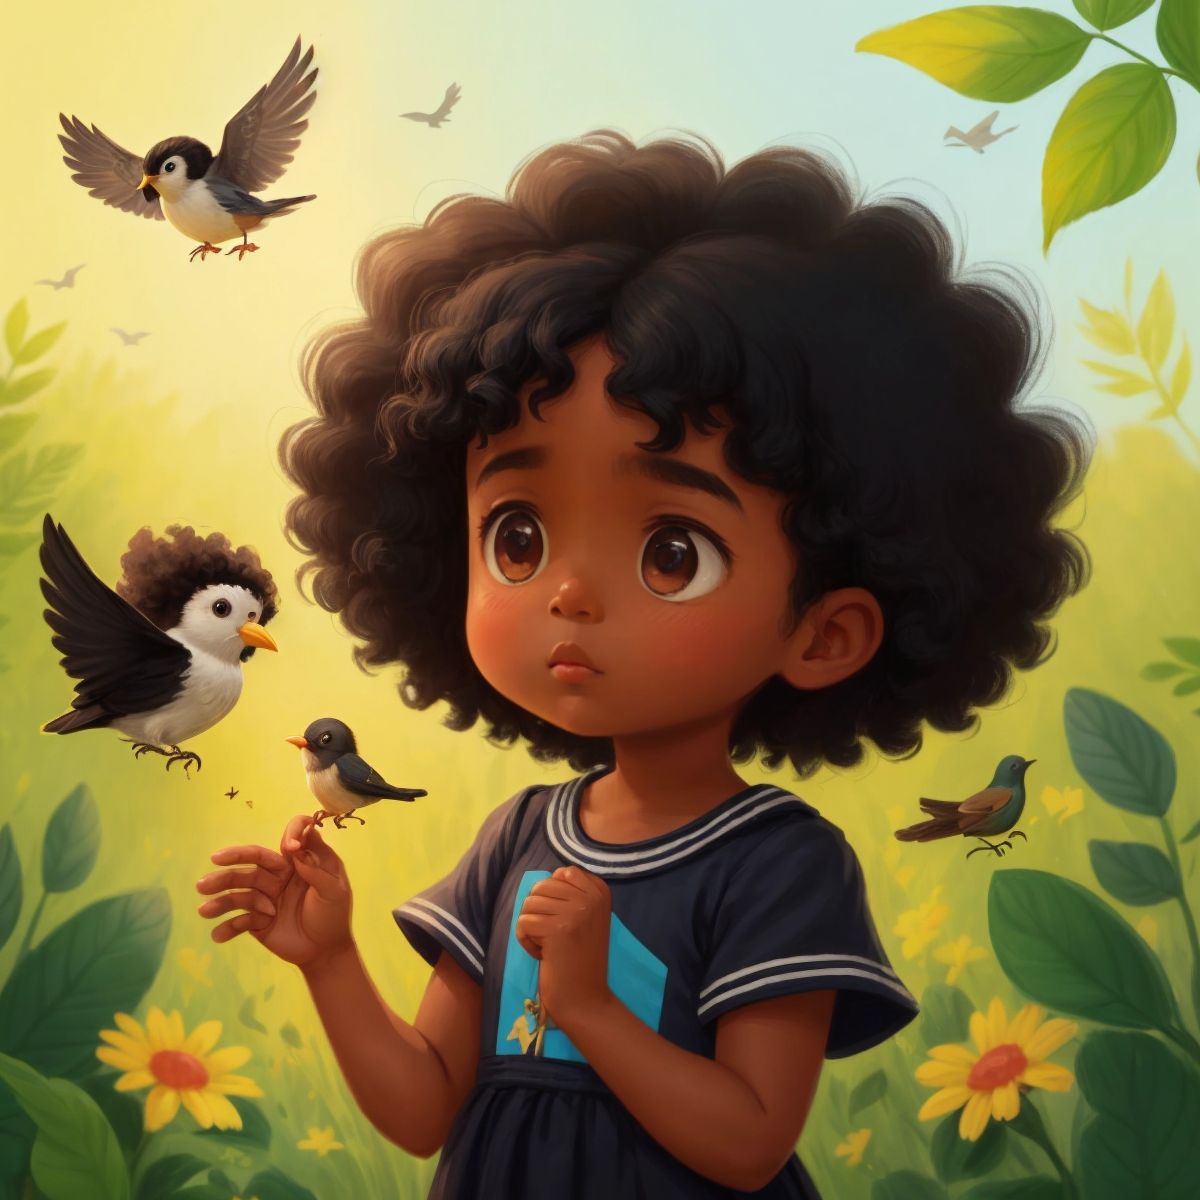 Zariah extending her hand out to a small bird with a broken wing, her face showing concern and compassion as she prays.